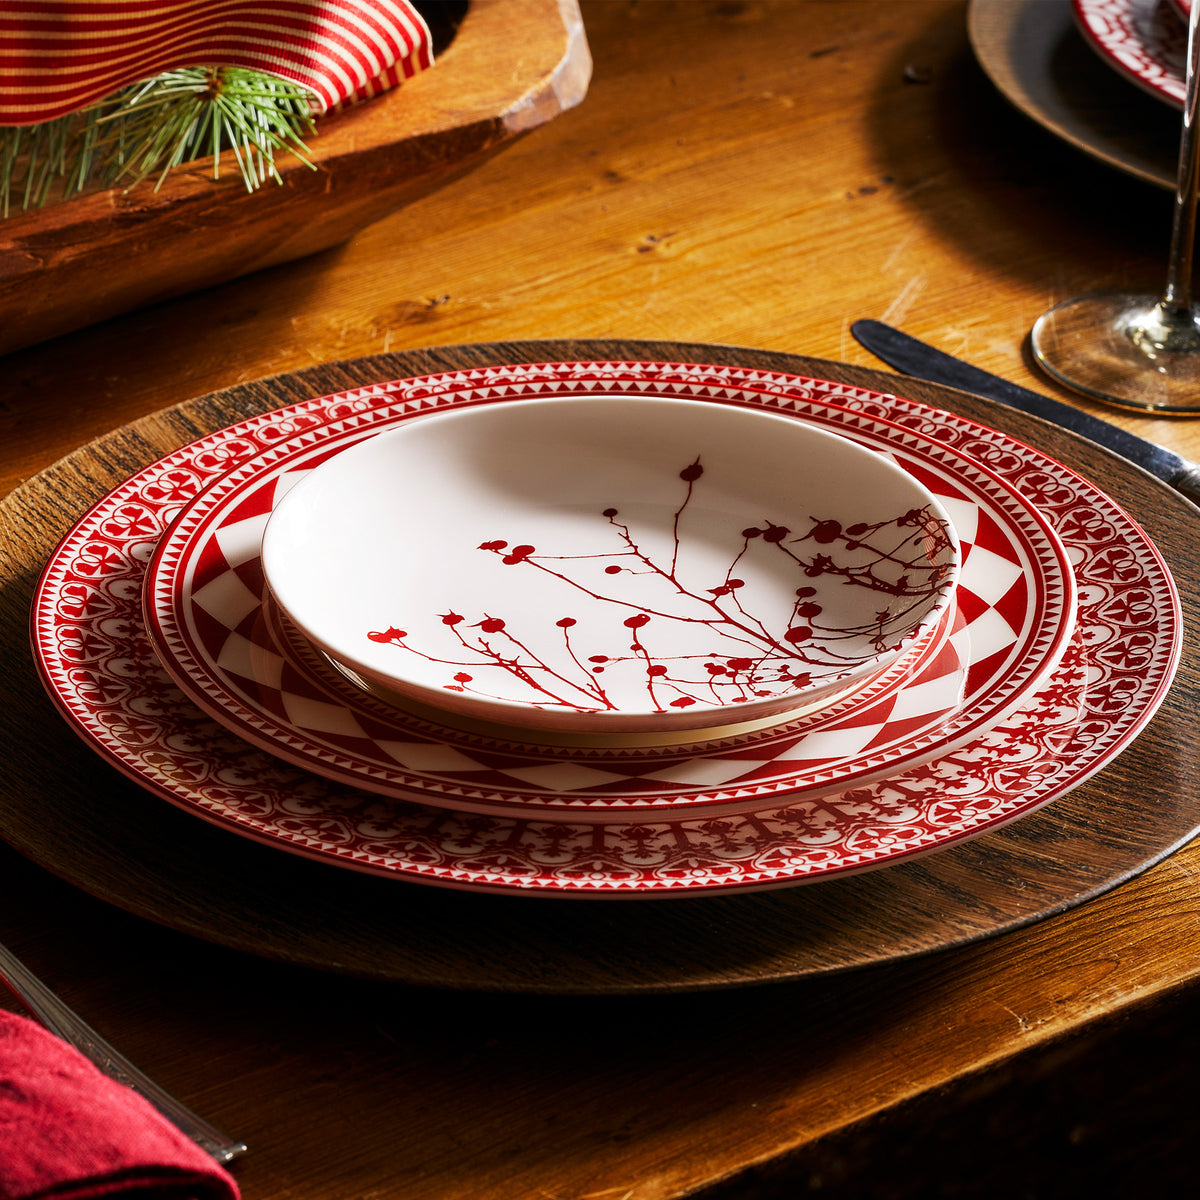 A wooden table set with heirloom-quality dinnerware showcasing a decorative plate arrangement featuring red and white patterns and branch designs, accompanied by a knife and a fork. The Caskata Artisanal Home Winterberries Small Plates add an elegant touch, reminiscent of Winter berries.